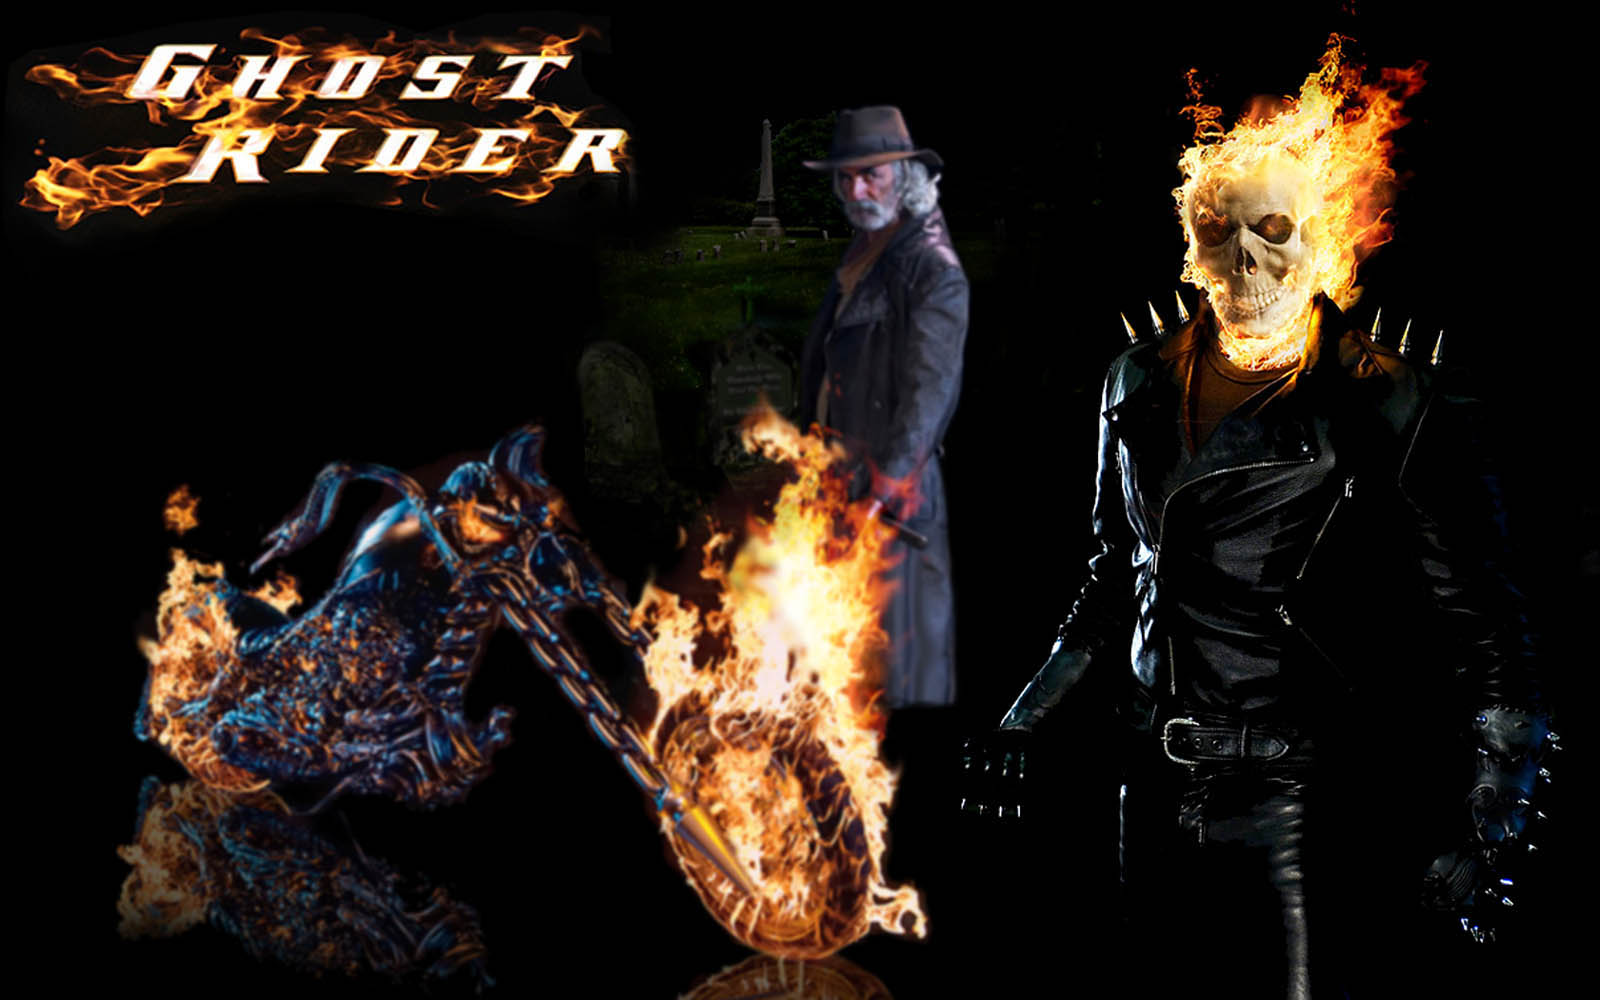 Tag Ghost Rider Wallpapers Images Photos Pictures and Backgrounds 1600x1000